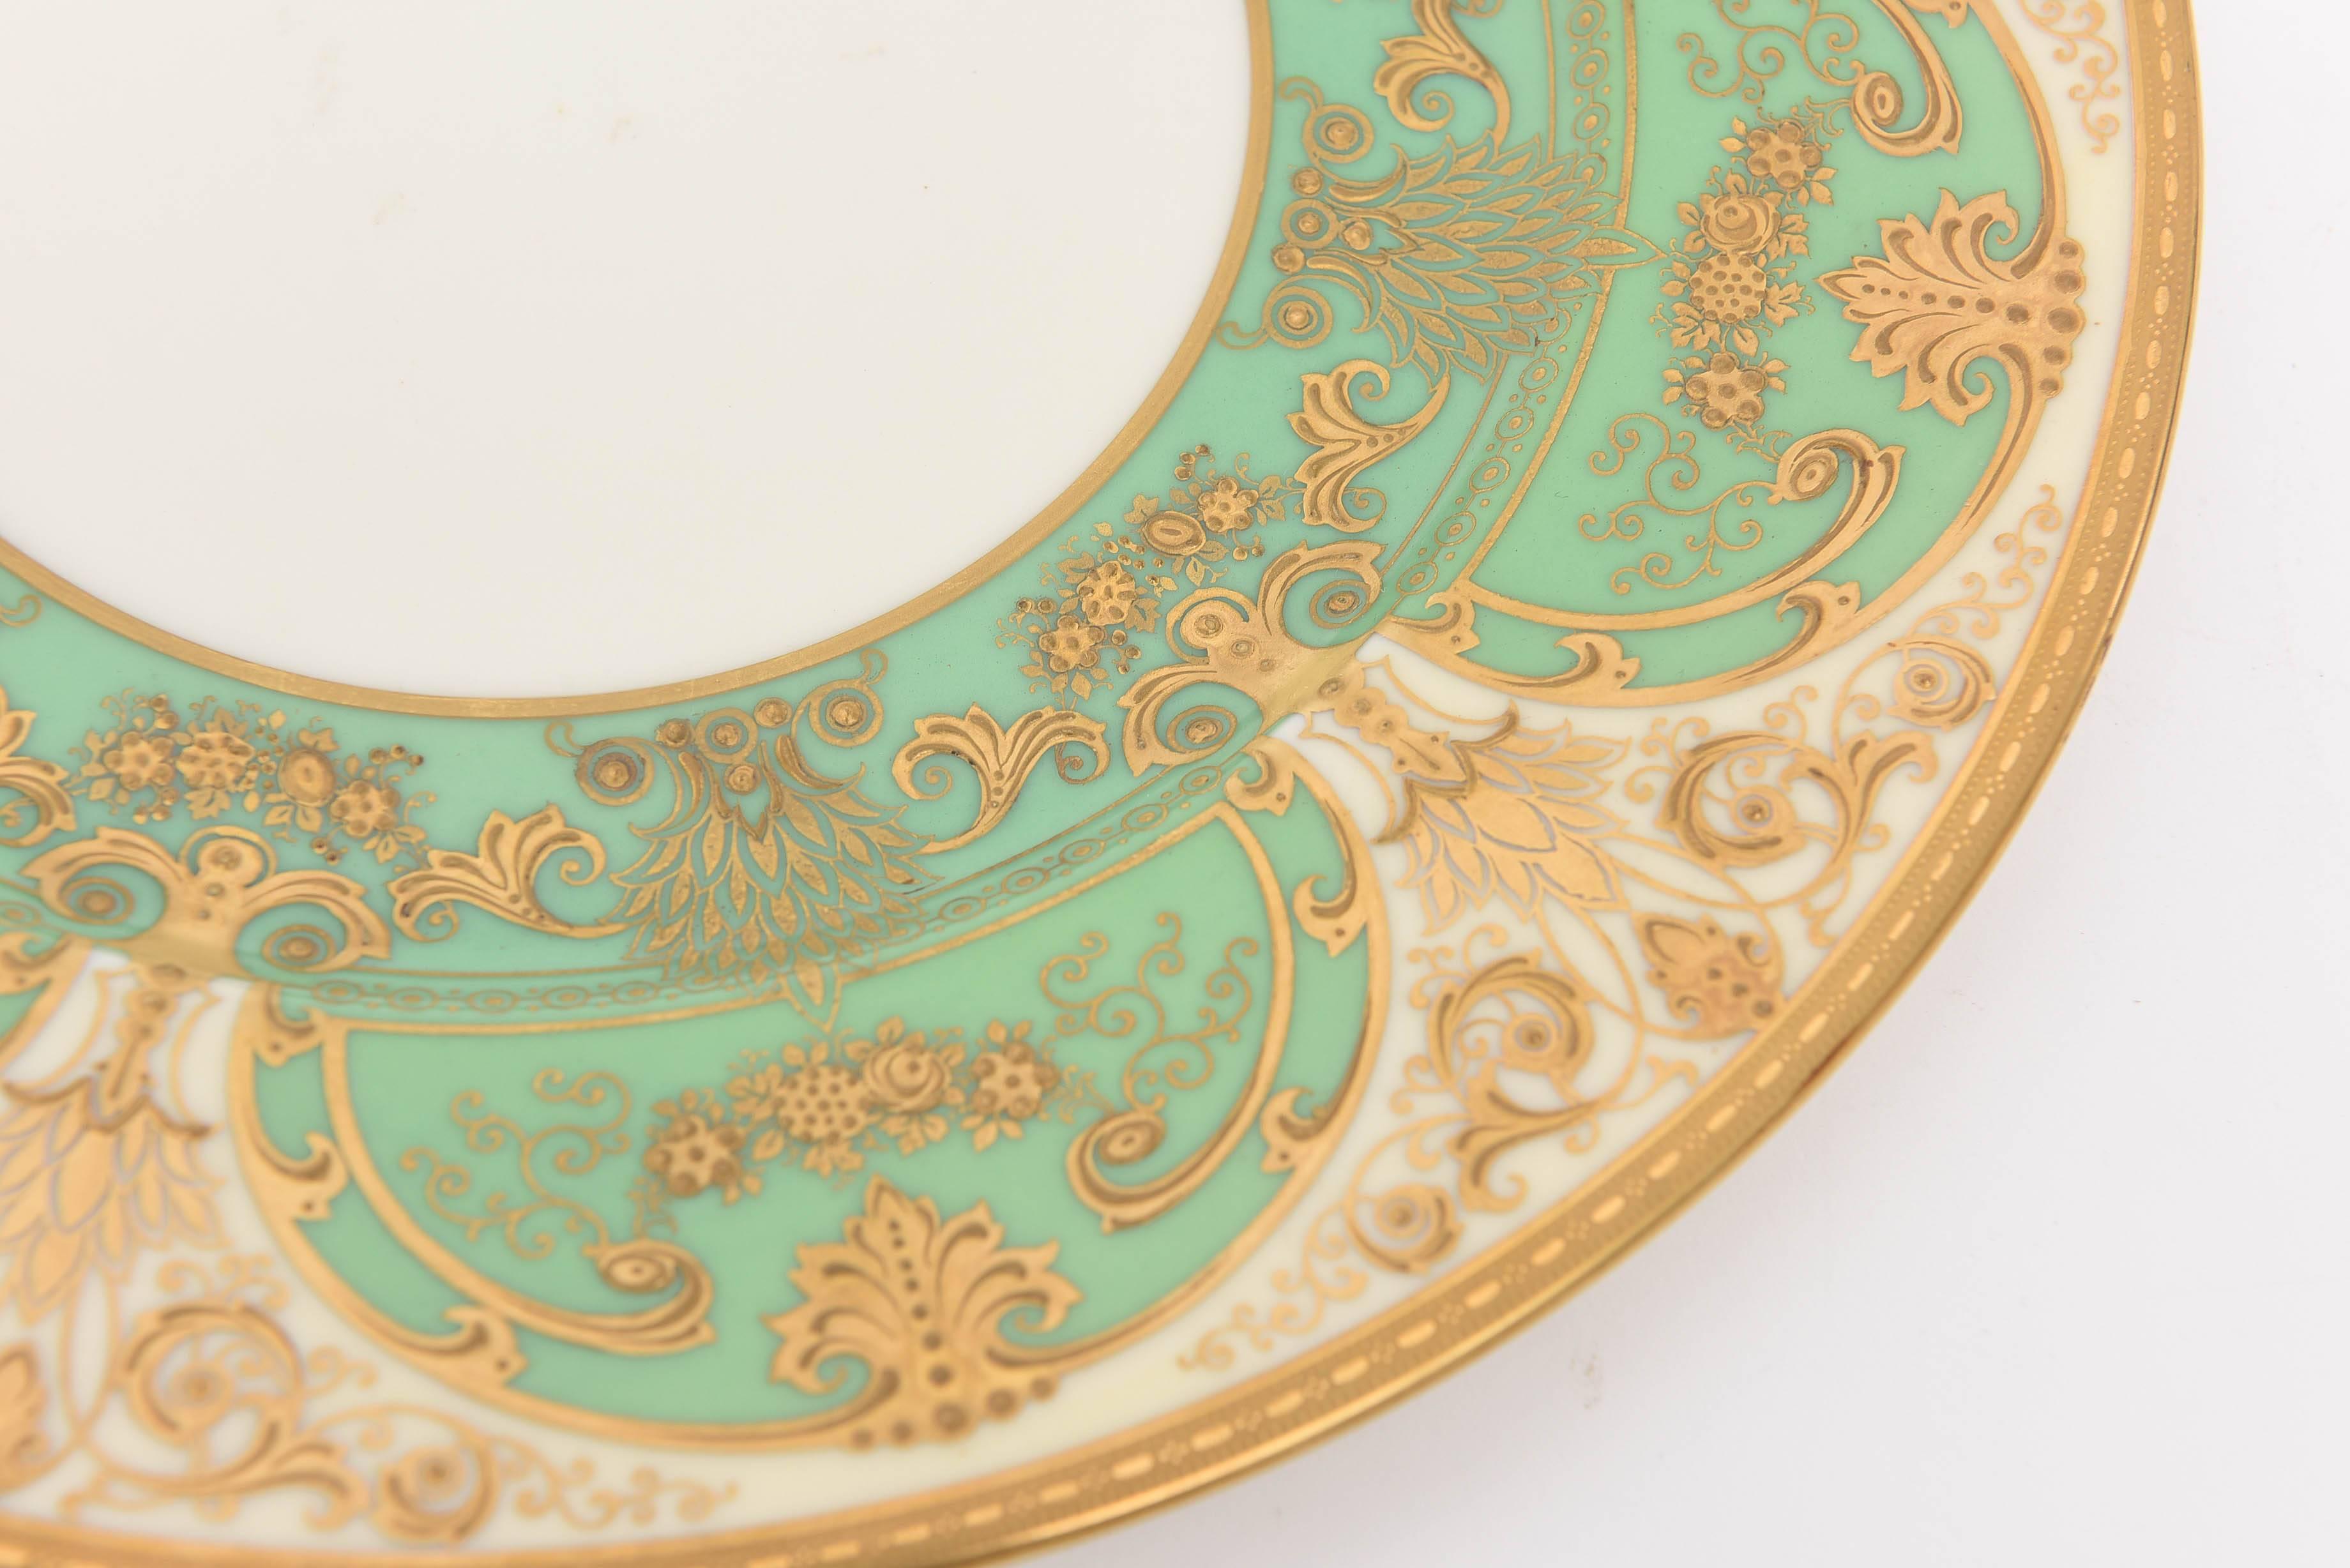 Hand-Crafted 12 Elaborate Green and Raised Gold Encrusted Presentation or Dinner Plates